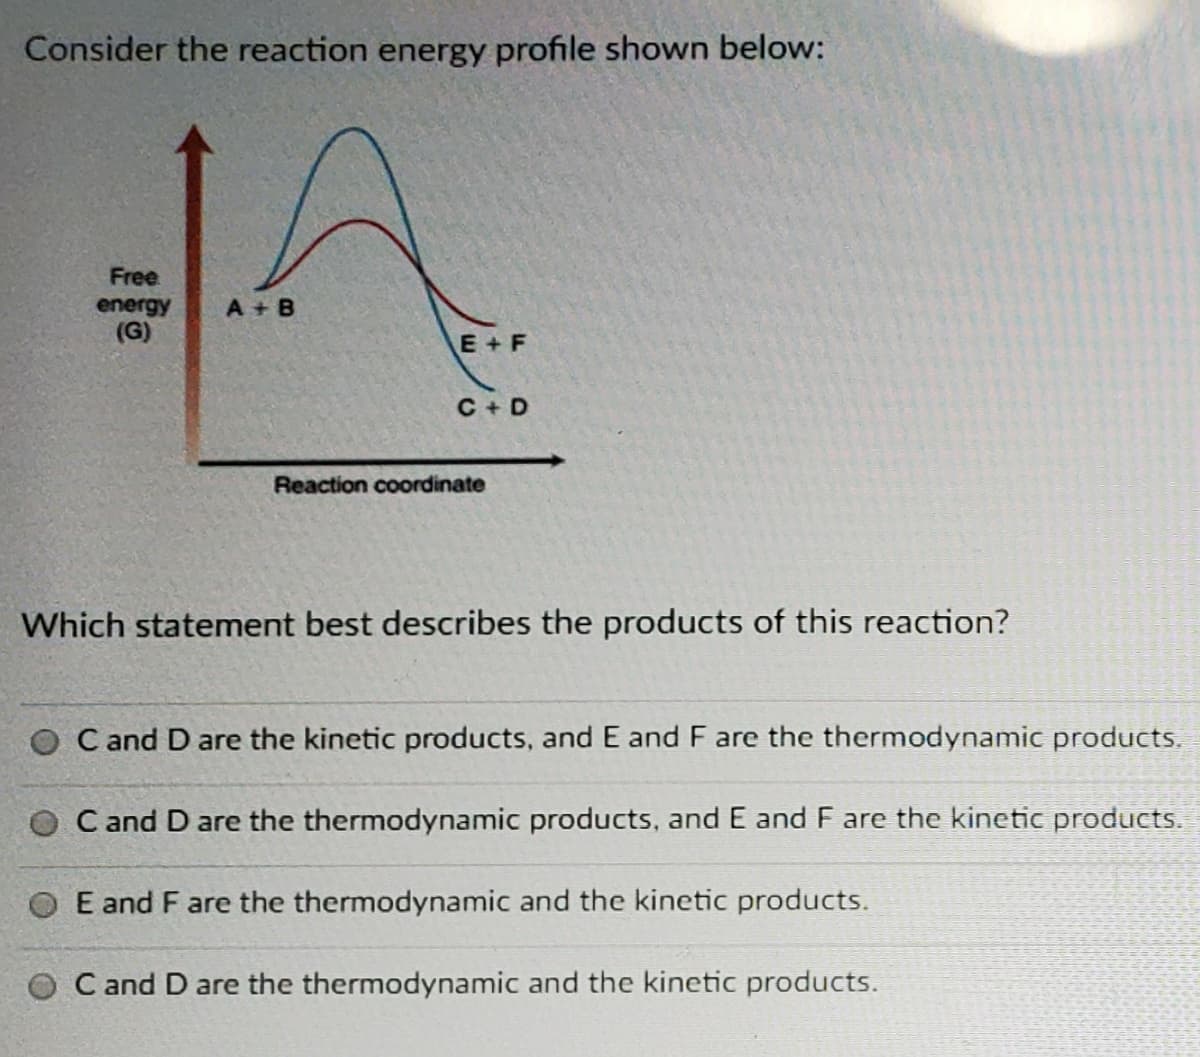 Consider the reaction energy profile shown below:
Free
A + B
energy
(G)
E + F
C D
Reaction coordinate
Which statement best describes the products of this reaction?
O C and D are the kinetic products, and E and F are the thermodynamic products.
O C and D are the thermodynamic products, and E and F are the kinetic products.
E and F are the thermodynamic and the kinetic products.
C and D are the thermodynamic and the kinetic products.
